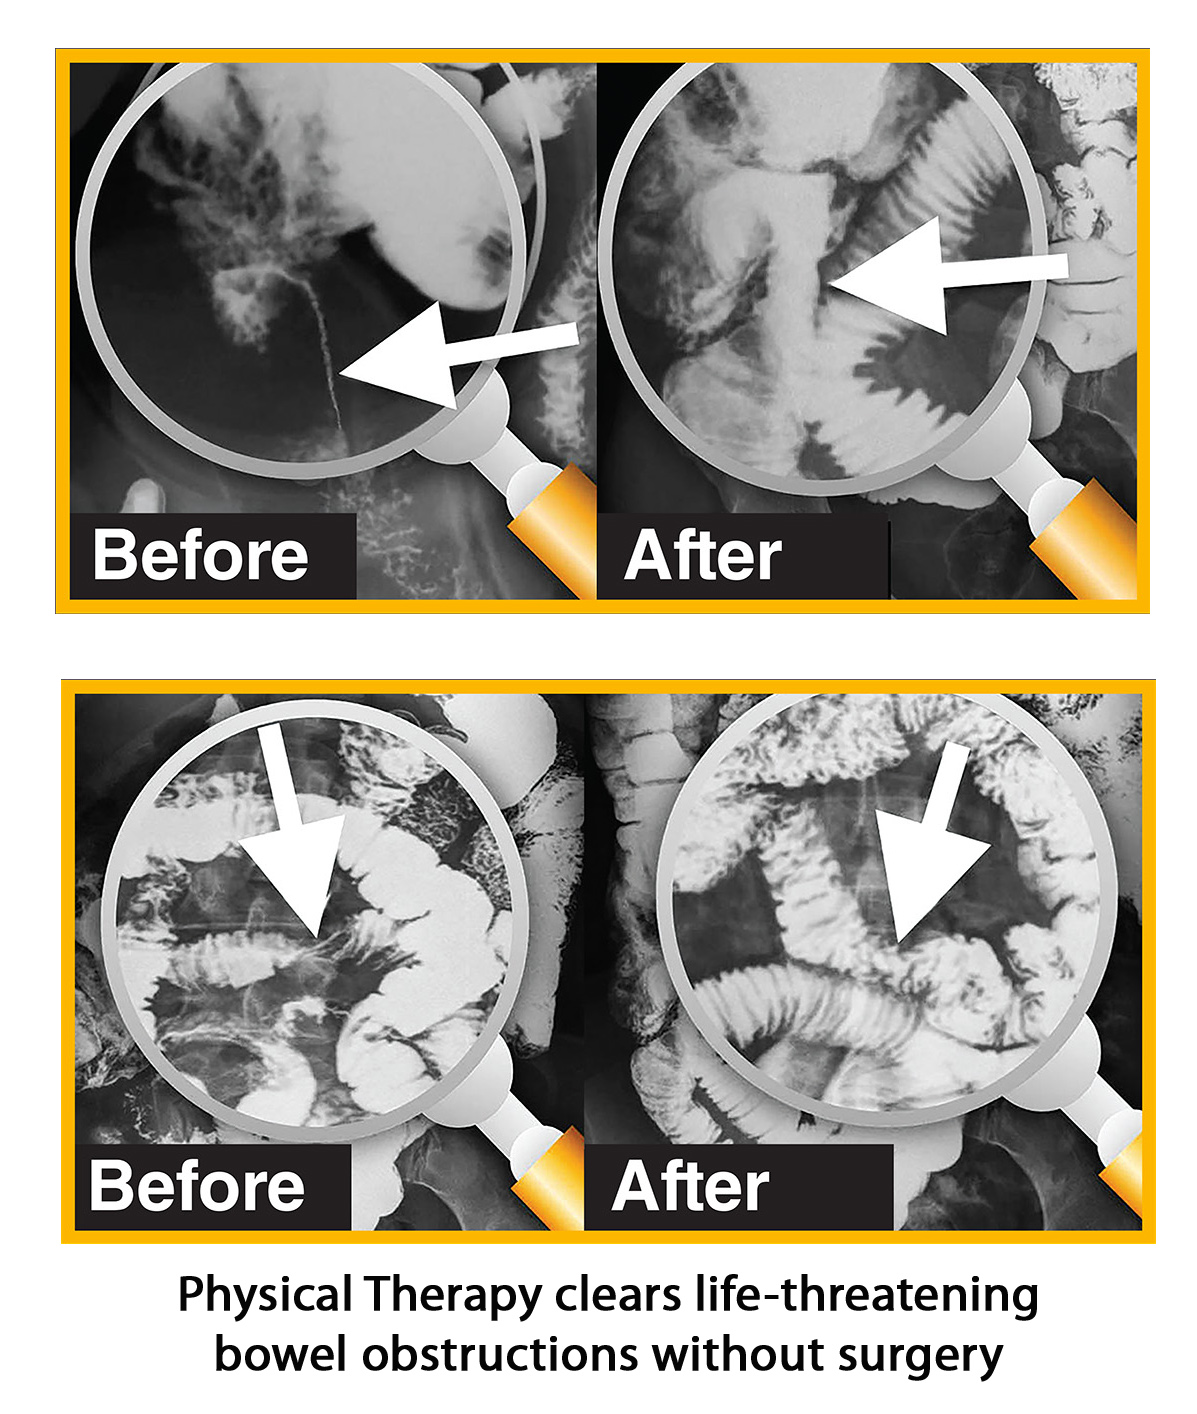 Before and after films of the intestines show that a unique, hands-on physical therapy cleared life-threatening bowel obstructions, eliminating the need for surgery.